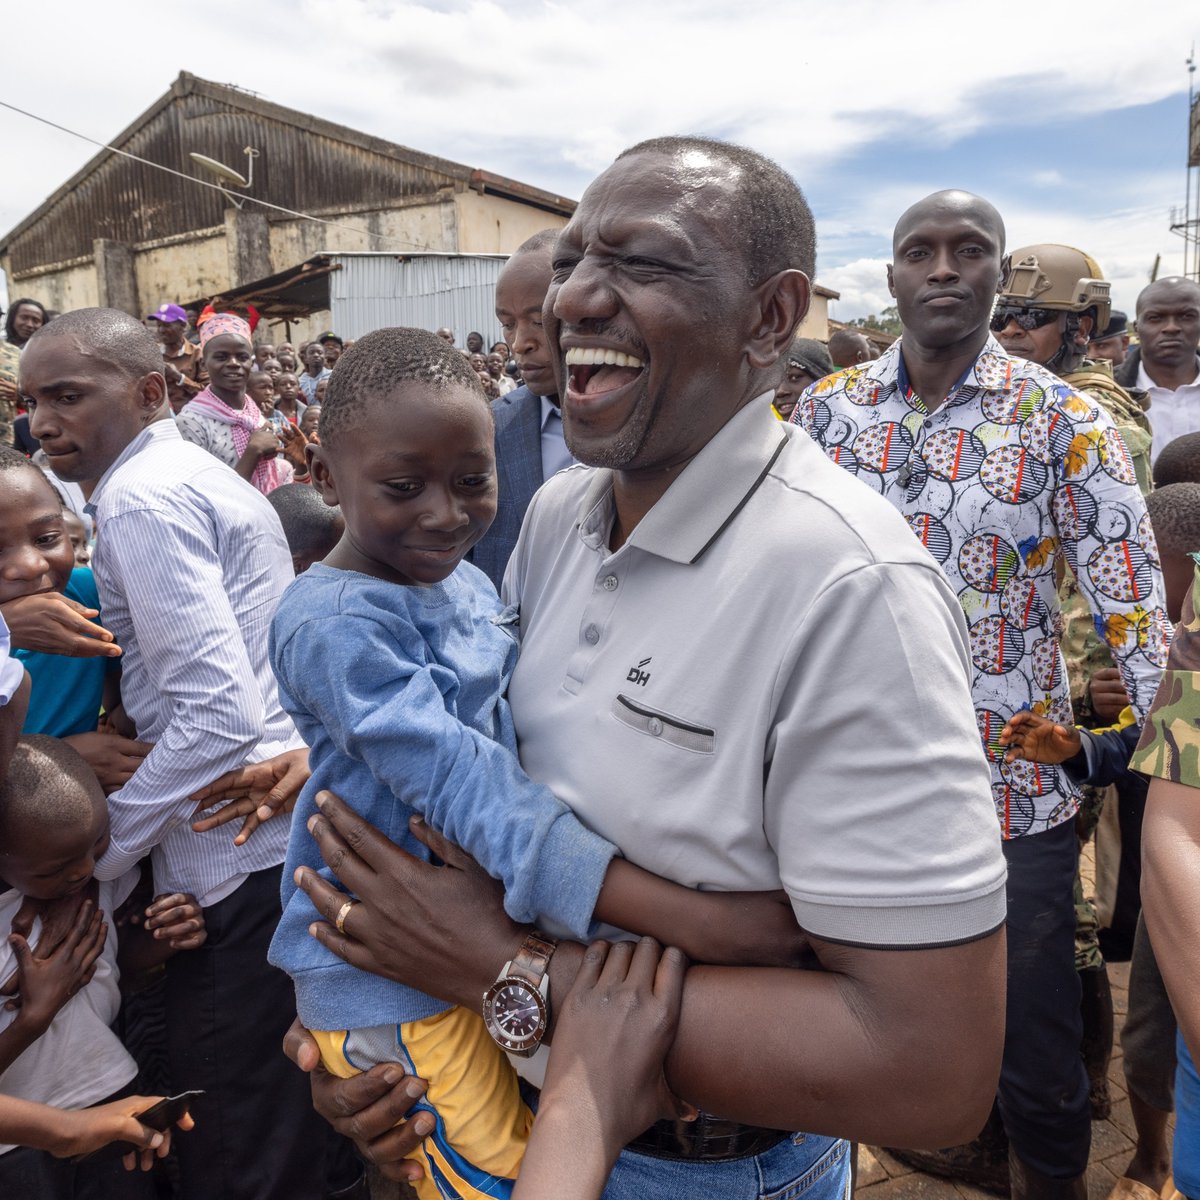 If President Ruto continue this way, Azimio may have it rough not just in 2027 but upto to 2032. Connecting with people is key, giving help and hope.